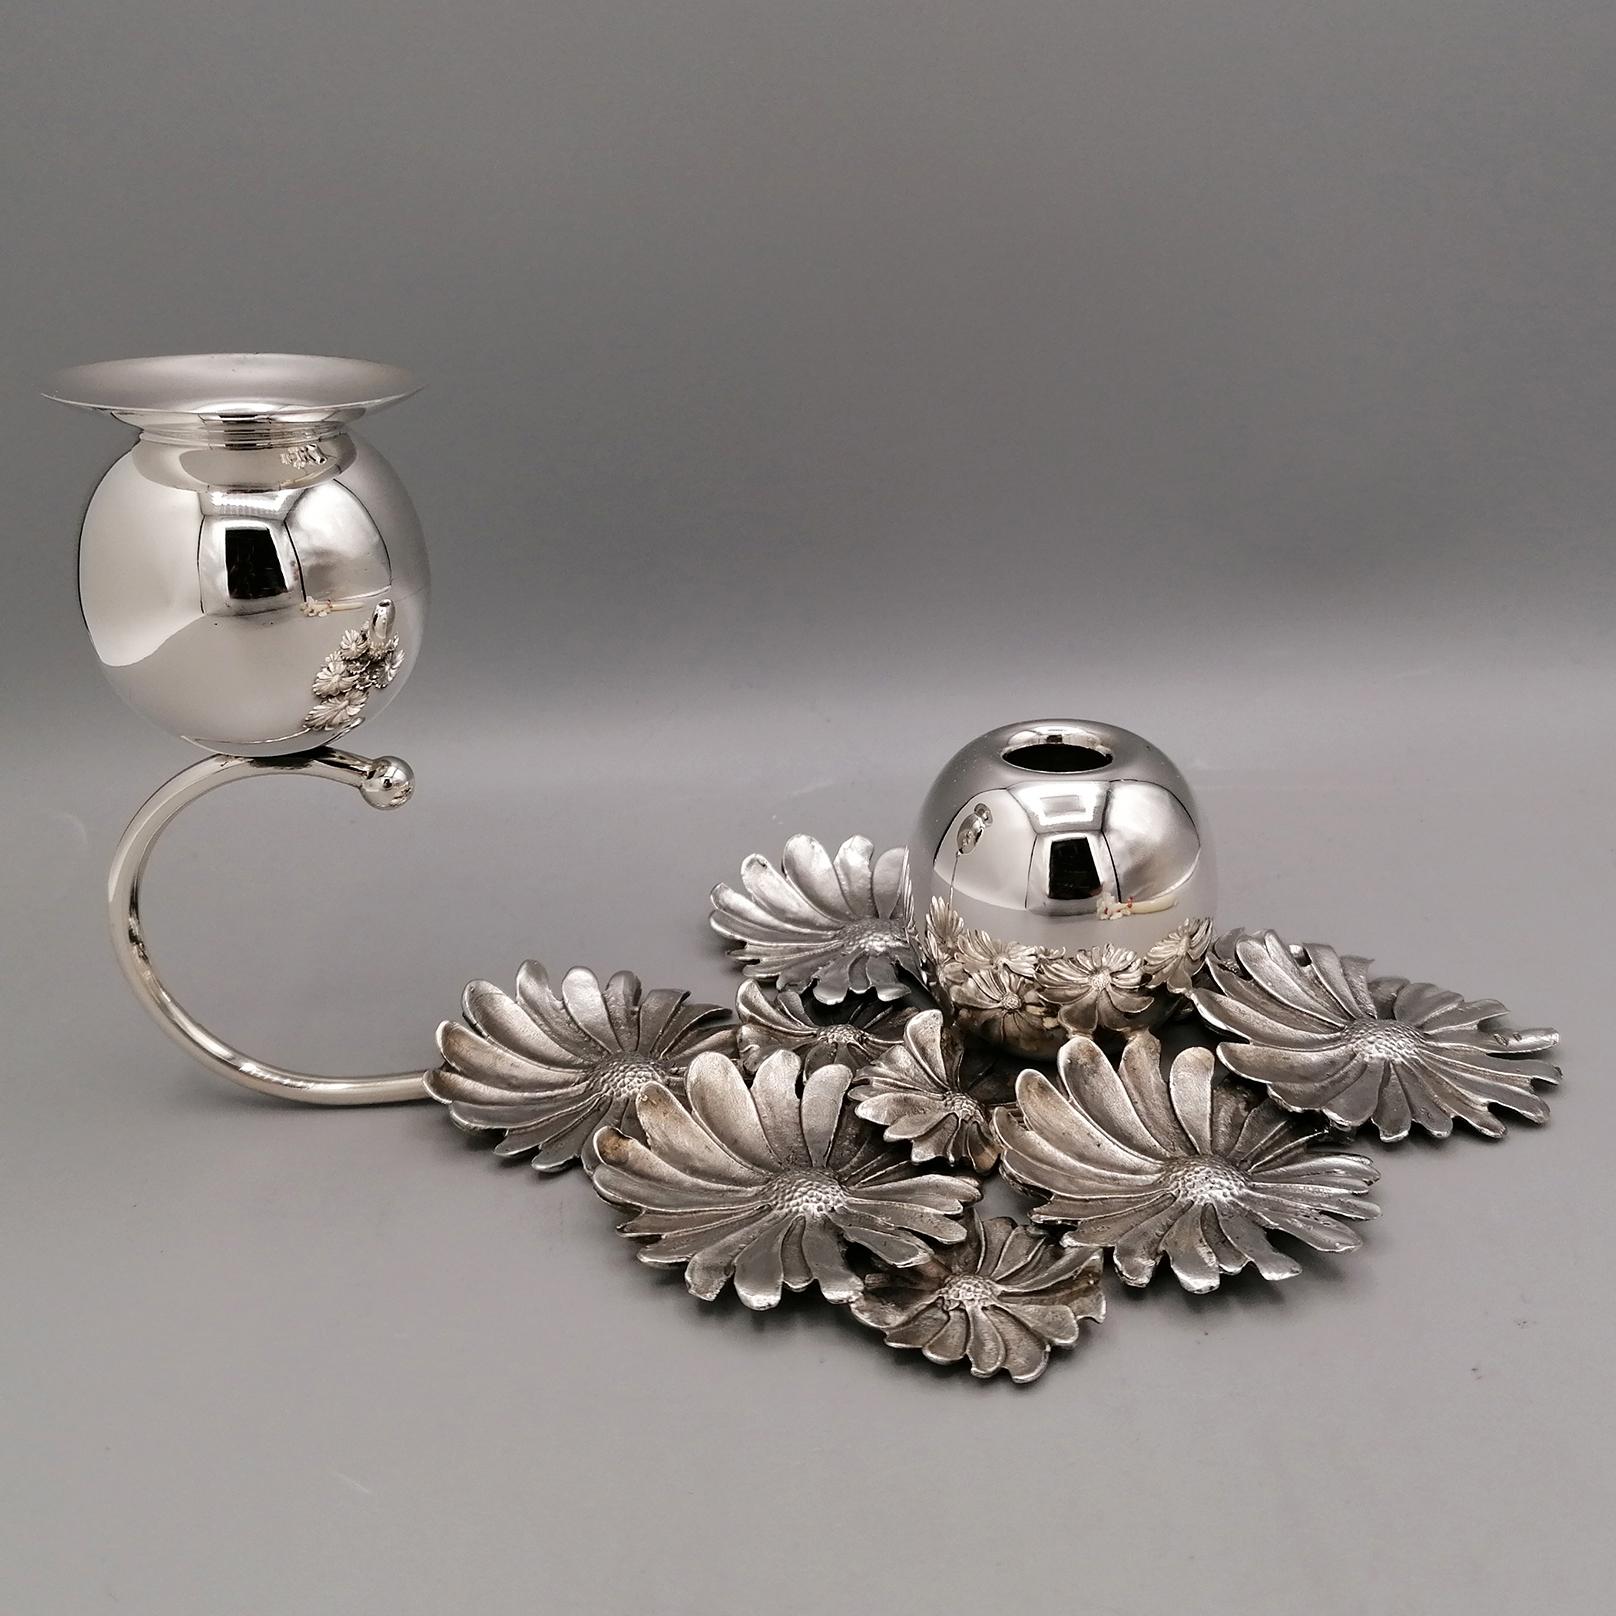 Attractive one-light candlestick/flower holder.
The base of the candlestick is made with daisy flowers made of Sterling silver using the fusion technique and then chiseled by hand to make the daisies look similar to real flowers.
Subsequently, a